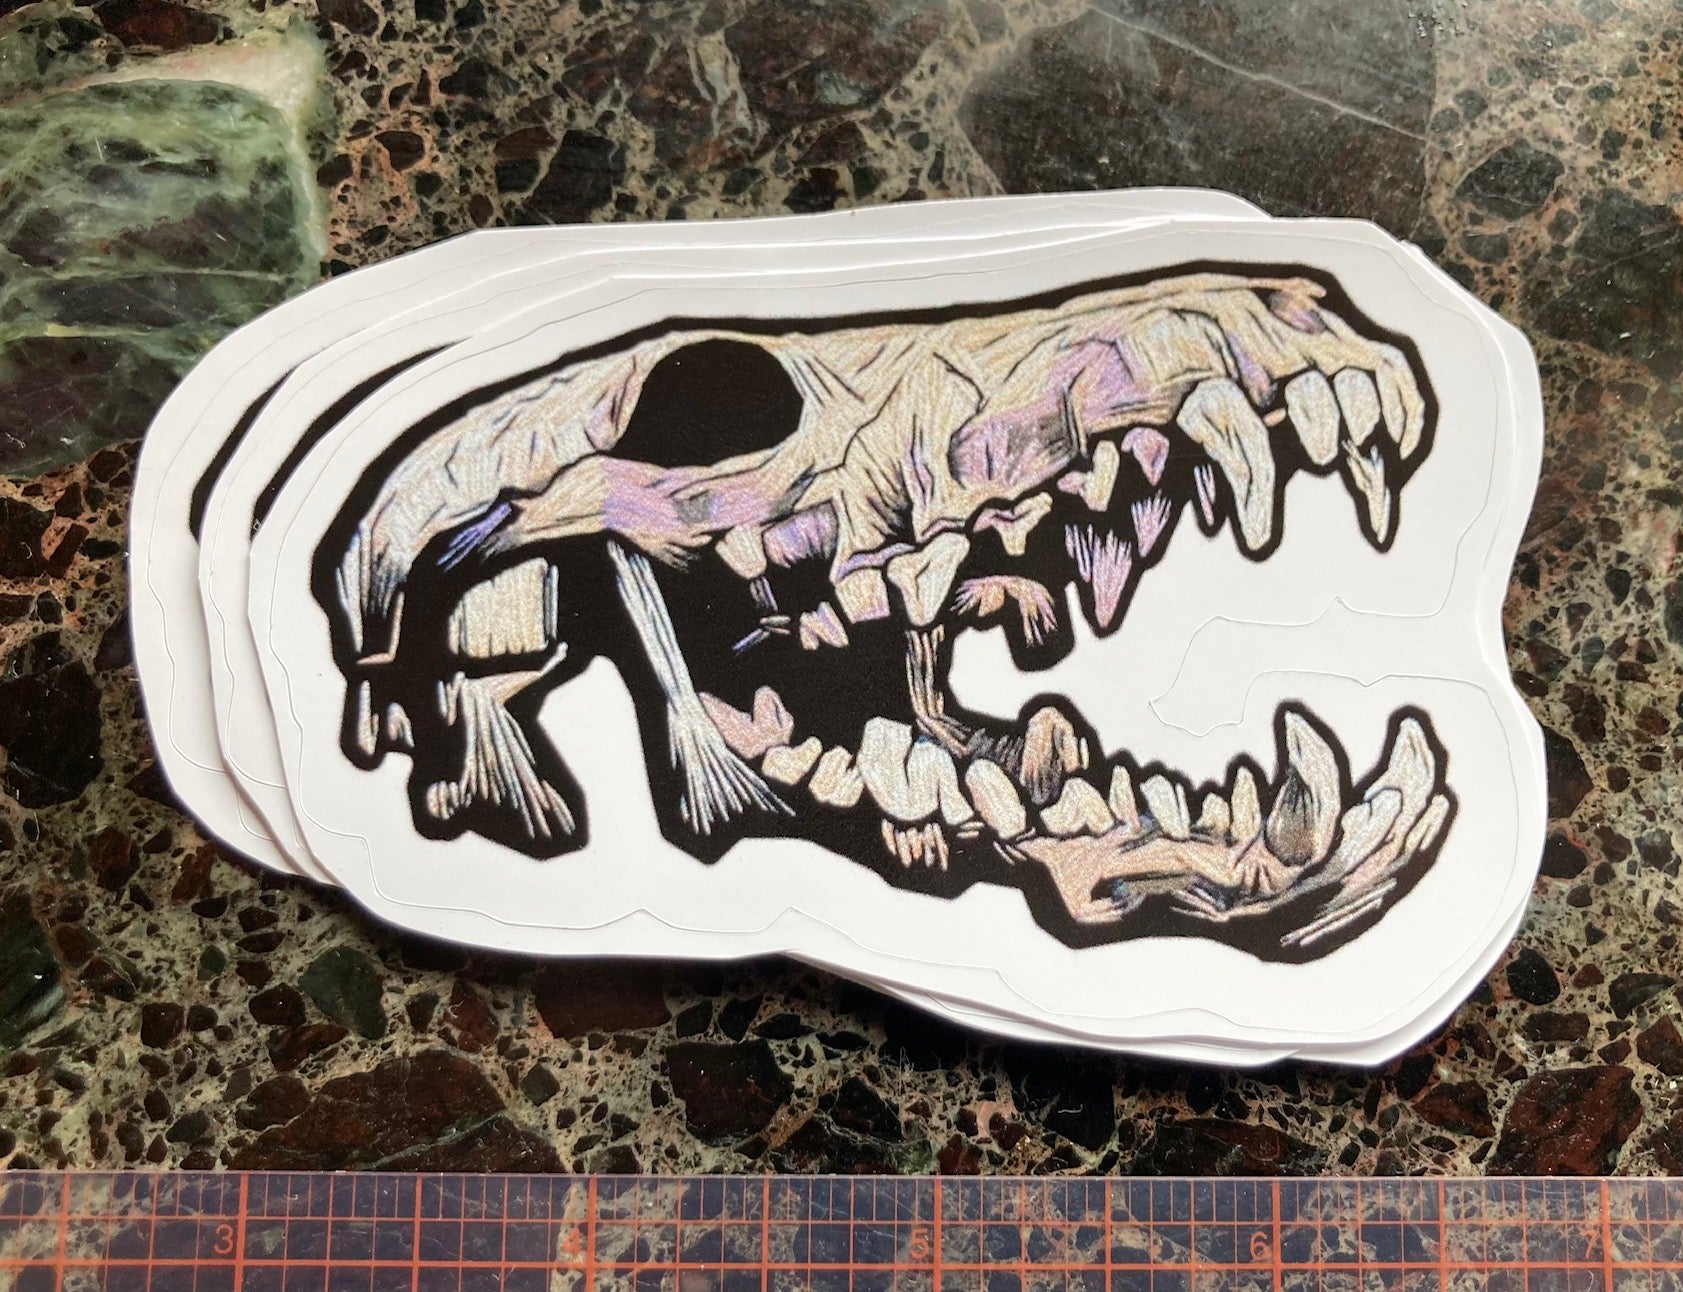 a sticker depicting an embroidered coyote skeleton with an open mouth and lots of teeth sits on a dark surface. The Embroidered skull is beige and lavender and black tones with lots of shadows. A visible ruler shows the sticker to be a little less than 4 inches long. 